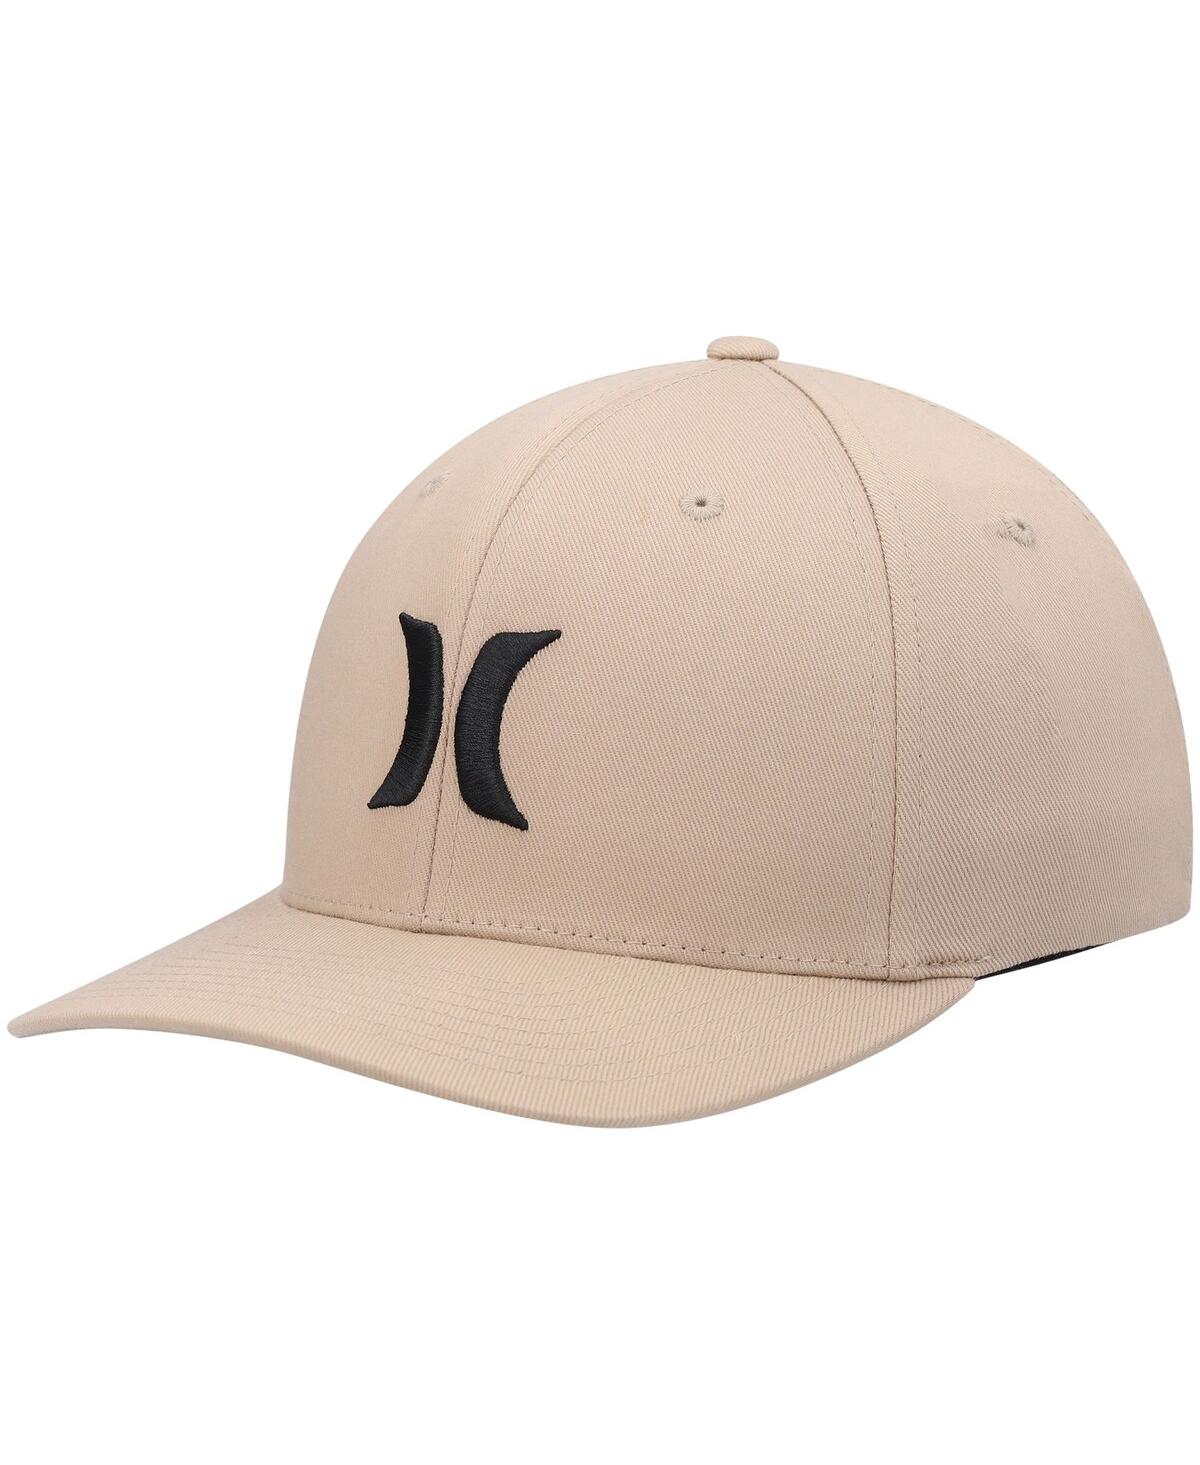 Hurley Men's  Khaki One And Only Tri-blend Flex Fit Hat